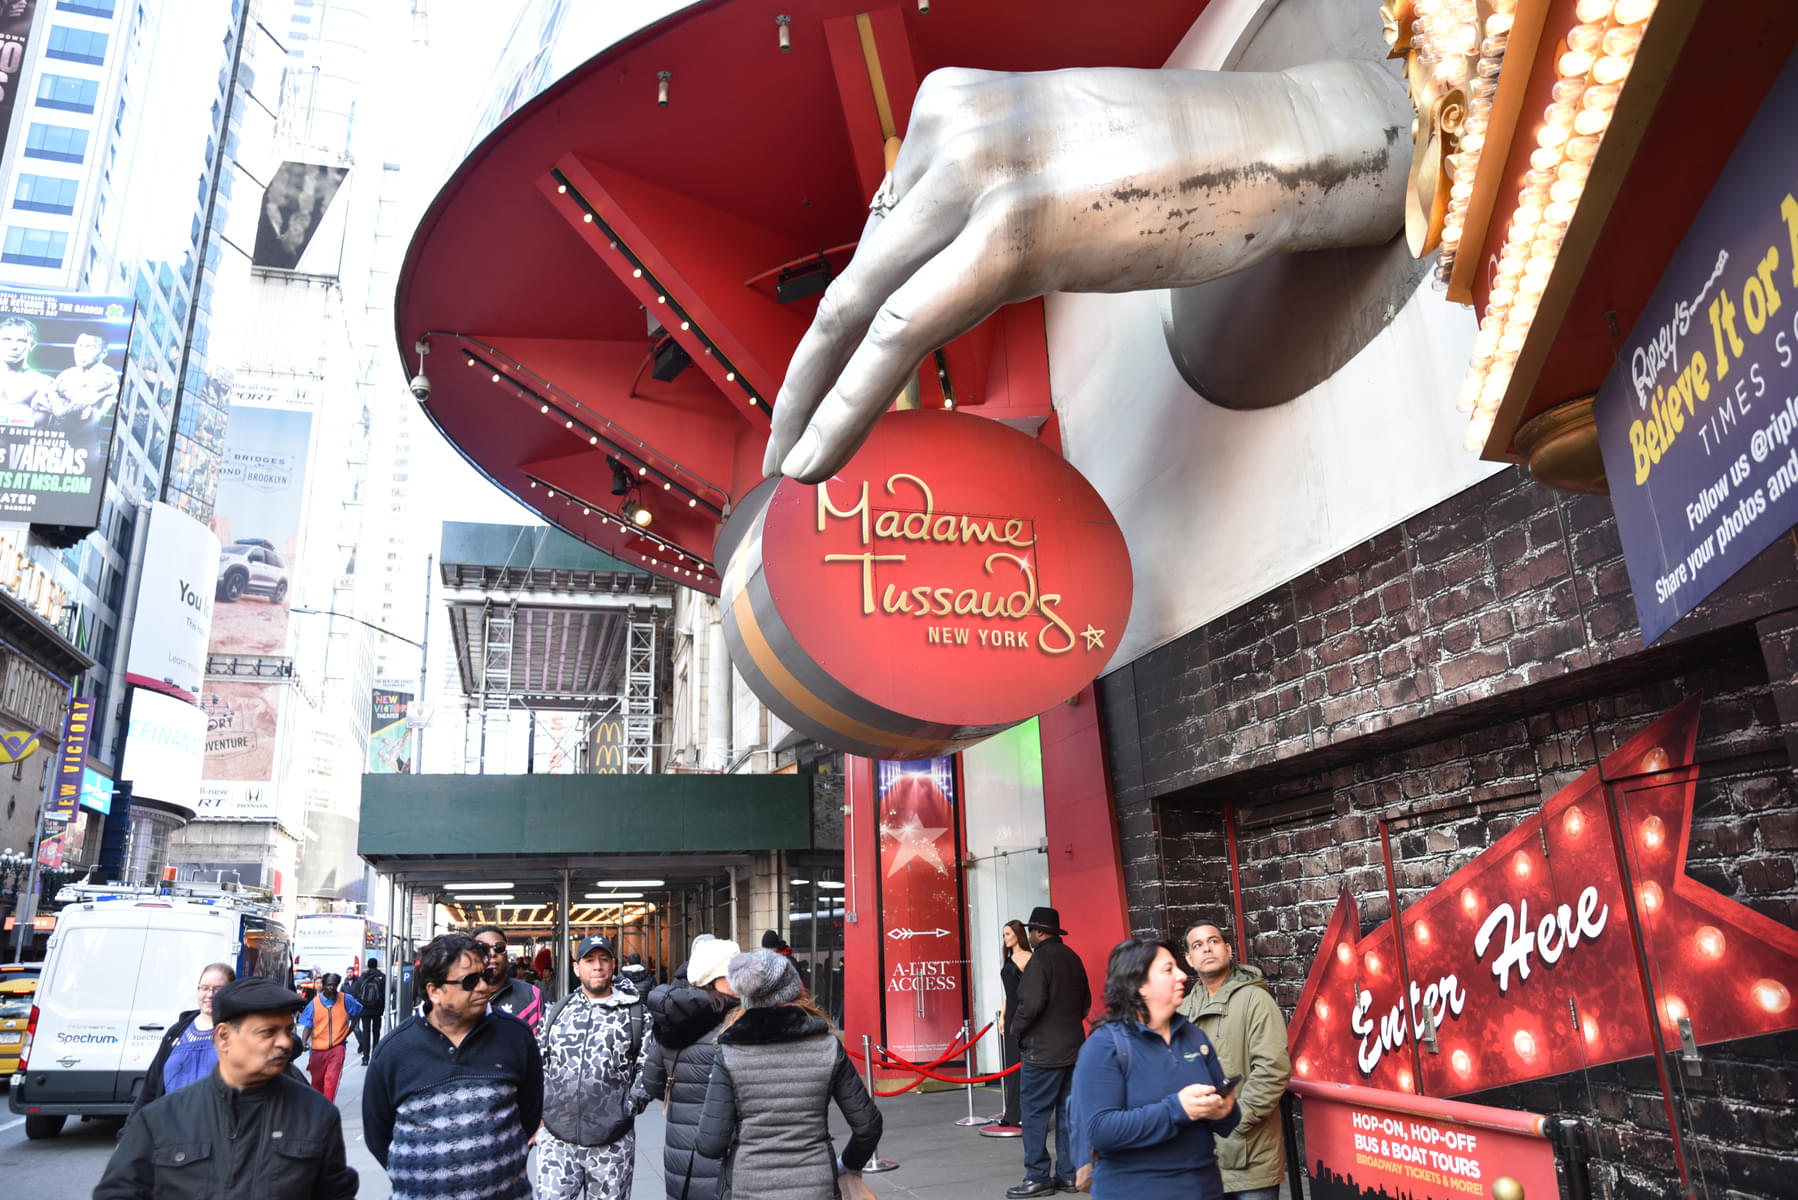 Visit one of the top attractions of New York, Madame Tussauds